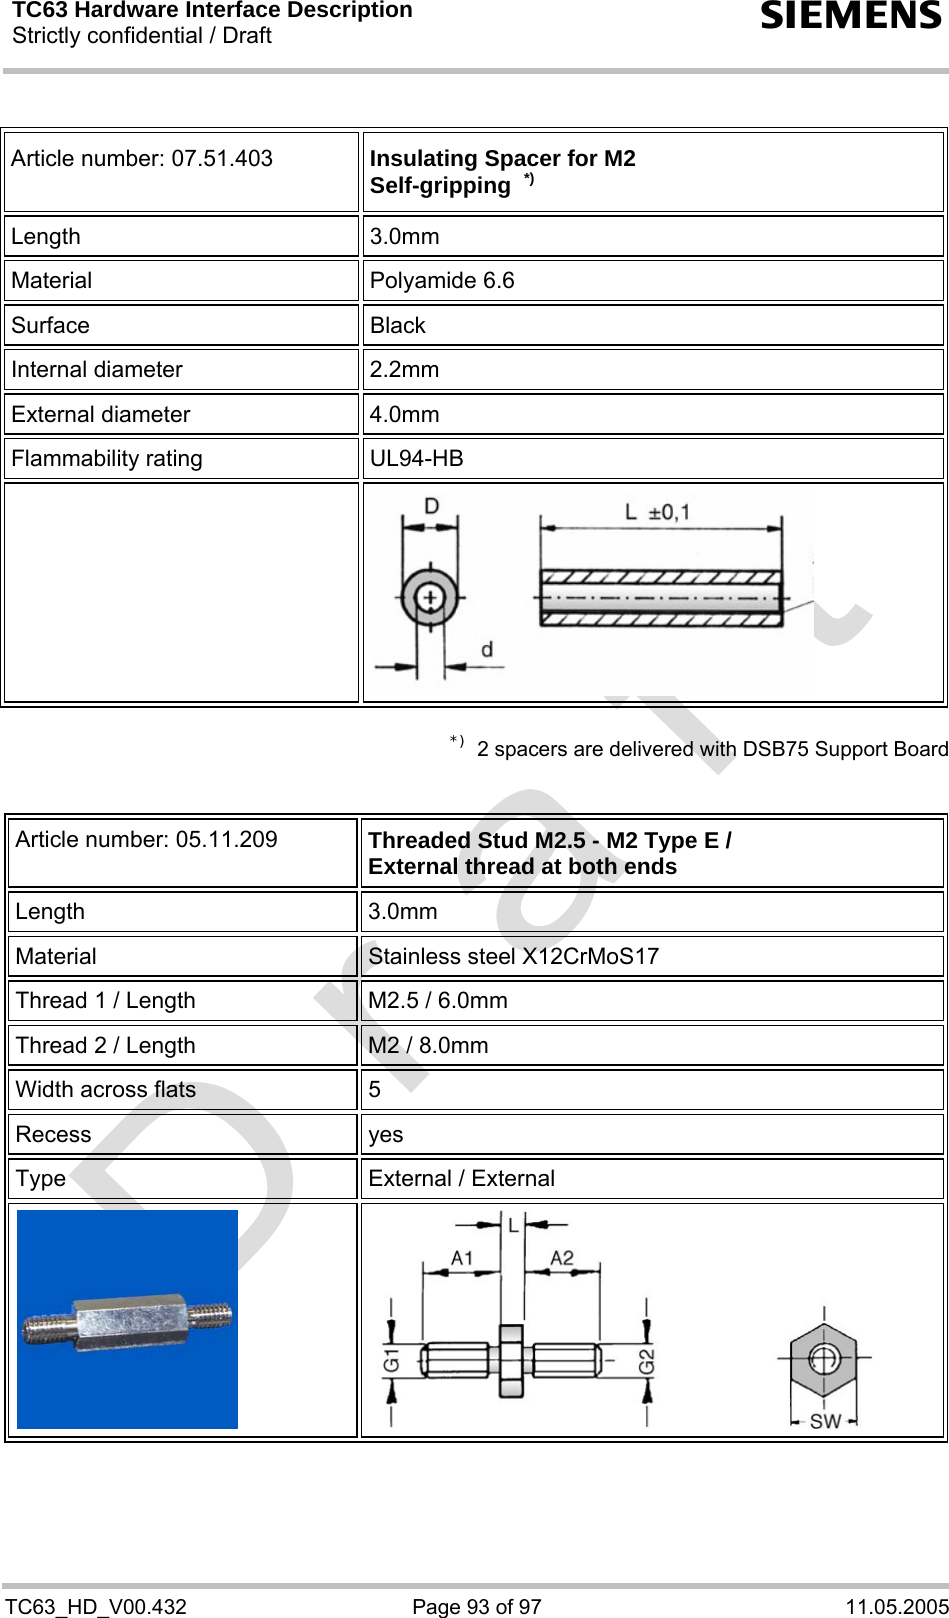 TC63 Hardware Interface Description Strictly confidential / Draft  s TC63_HD_V00.432  Page 93 of 97  11.05.2005  Article number: 07.51.403  Insulating Spacer for M2 Self-gripping  *) Length 3.0mm Material Polyamide 6.6 Surface Black Internal diameter  2.2mm External diameter  4.0mm Flammability rating  UL94-HB    *)  2 spacers are delivered with DSB75 Support Board   Article number: 05.11.209   Threaded Stud M2.5 - M2 Type E / External thread at both ends Length 3.0mm Material  Stainless steel X12CrMoS17 Thread 1 / Length  M2.5 / 6.0mm Thread 2 / Length  M2 / 8.0mm Width across flats  5  Recess yes Type  External / External     